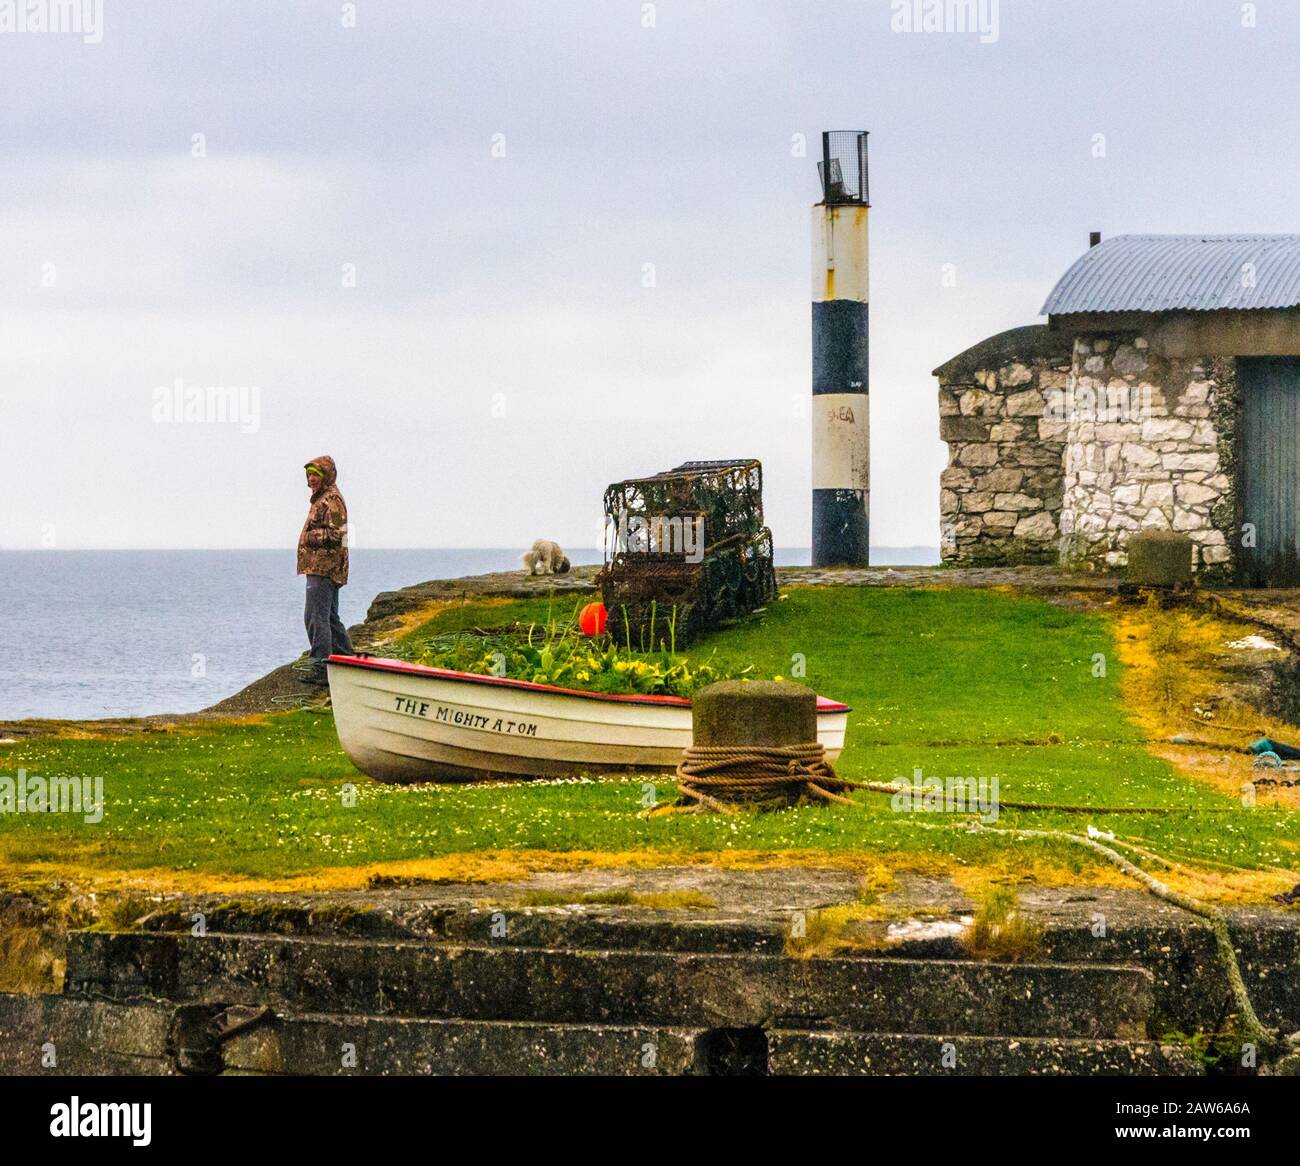 Carnlough-Northern Ireland, UK/May 19-2020:  Small harbor and lighthouse in fishing village under cloudy skies with a view of sea beyond. Stock Photo